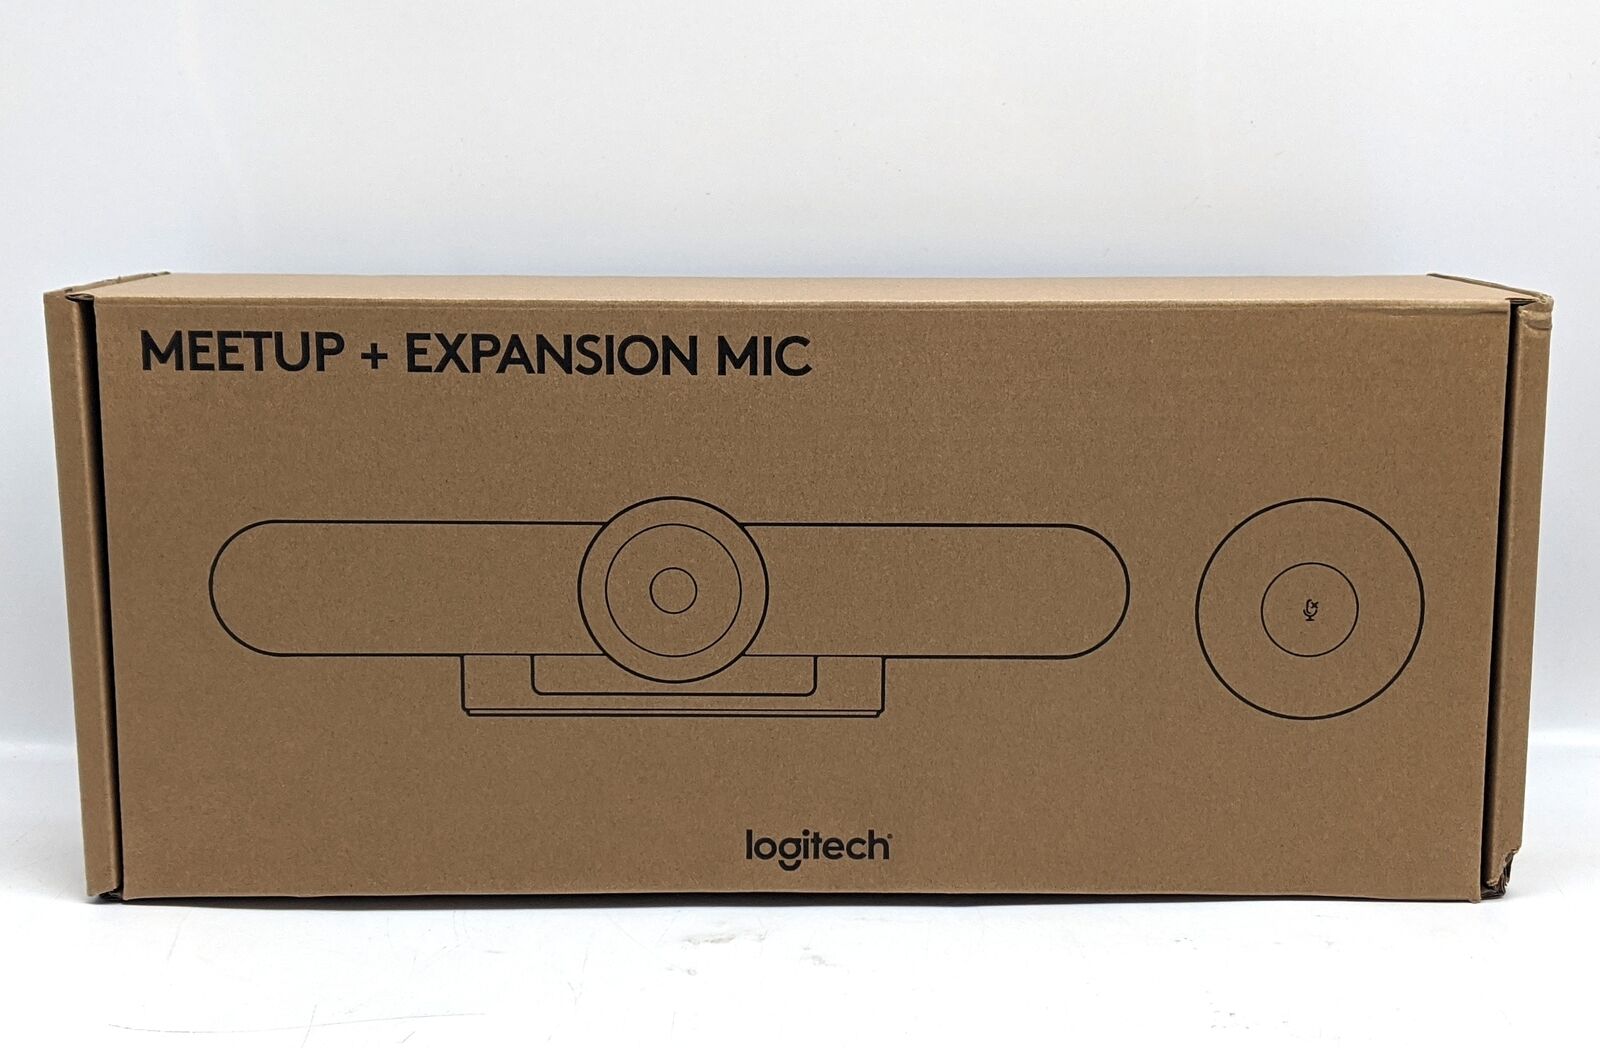 Logitech 960-001201 Meetup + Expansion Mic Audio Conferencing System